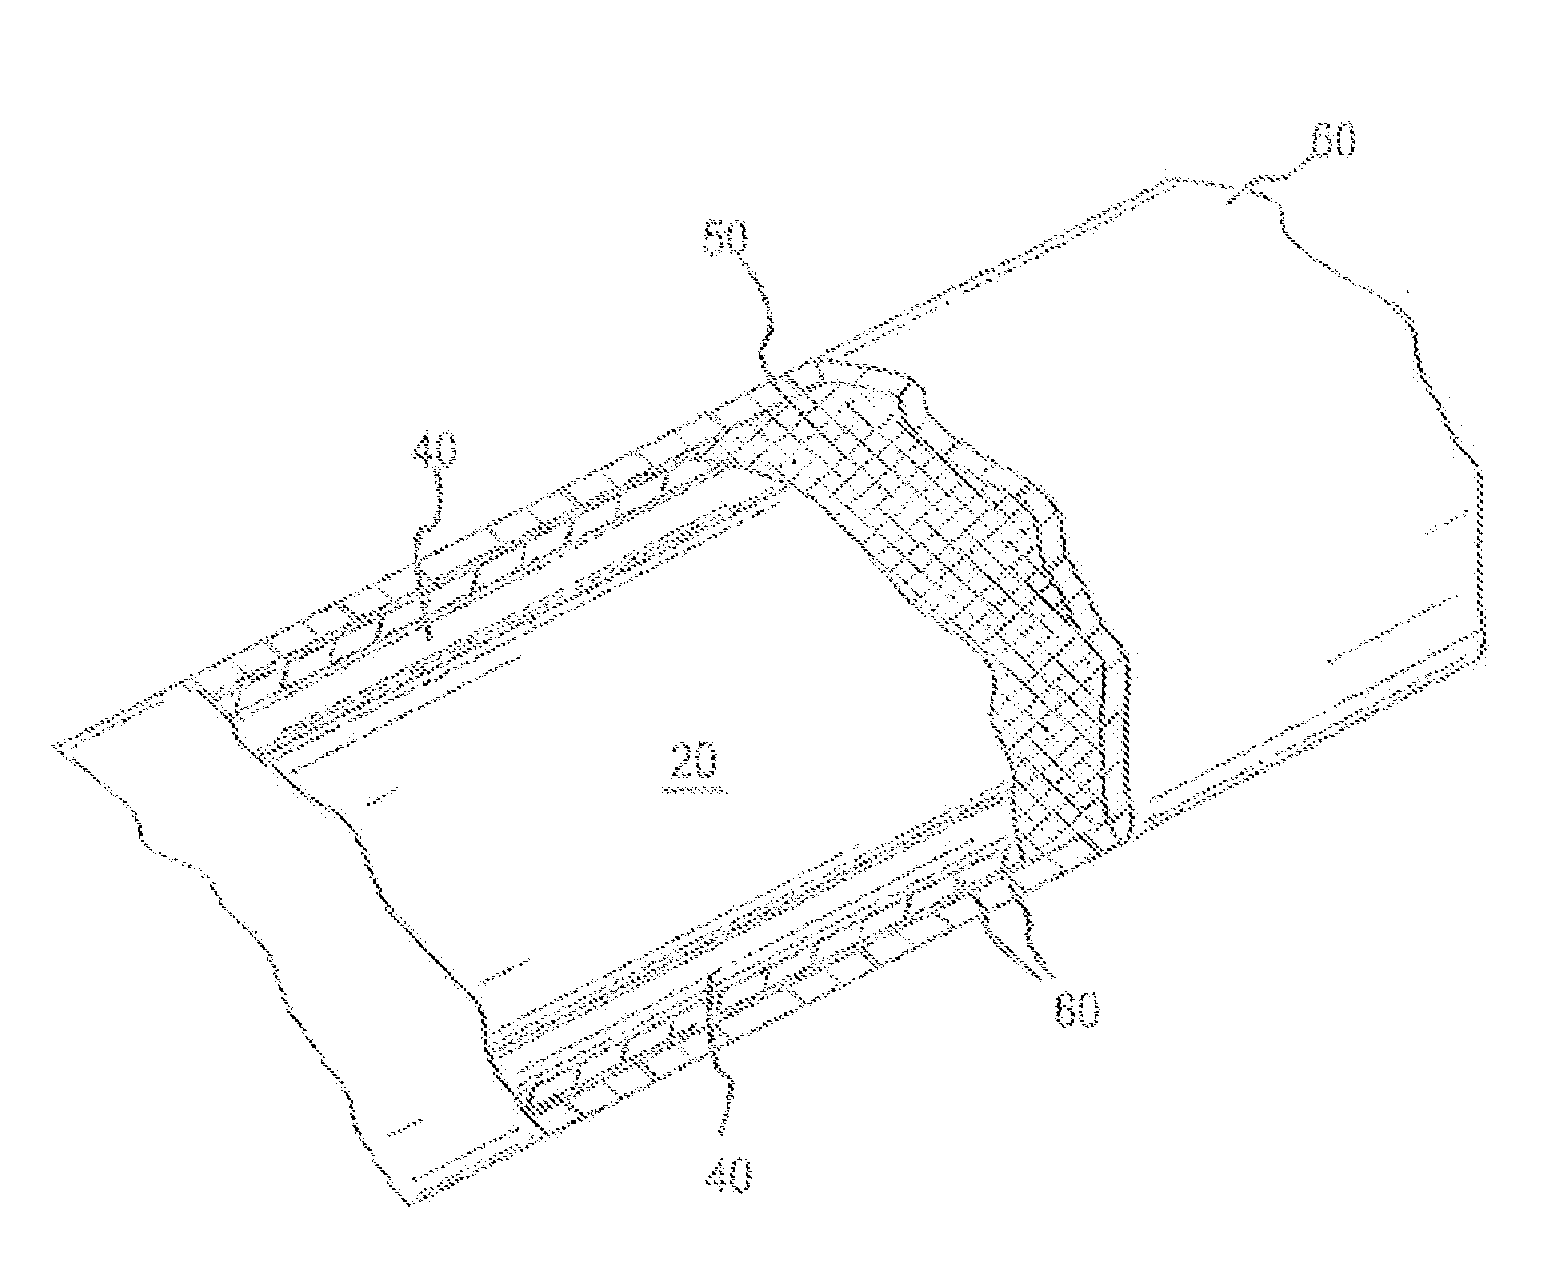 Steerable Medical Device Having Multiple Curve Profiles